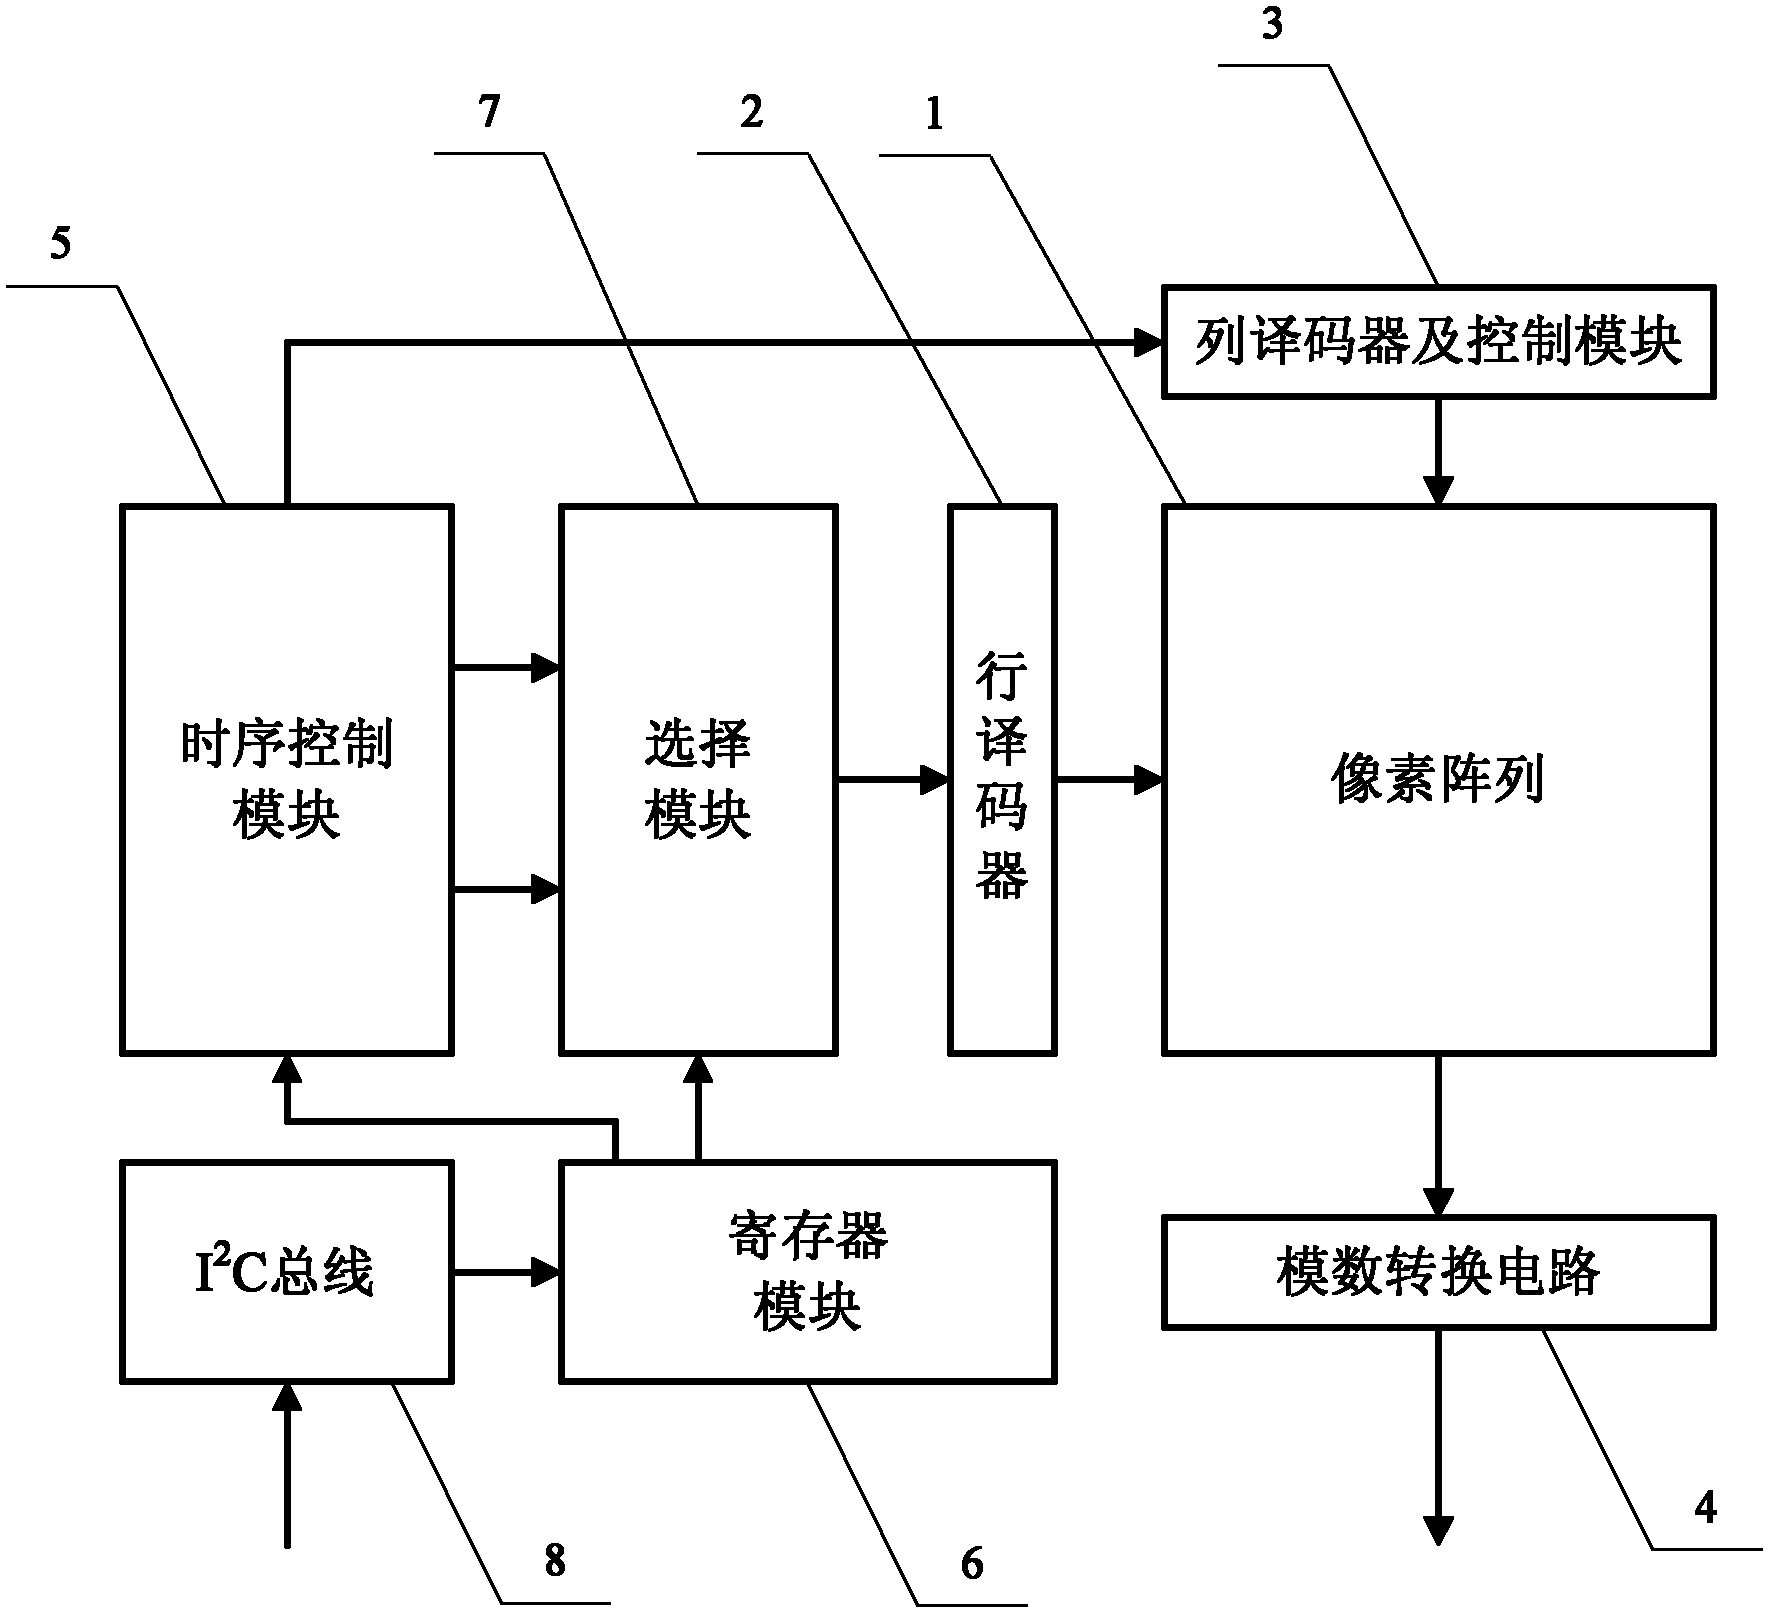 Image sensor with sampling control function as well as multi-image sensor system and working method